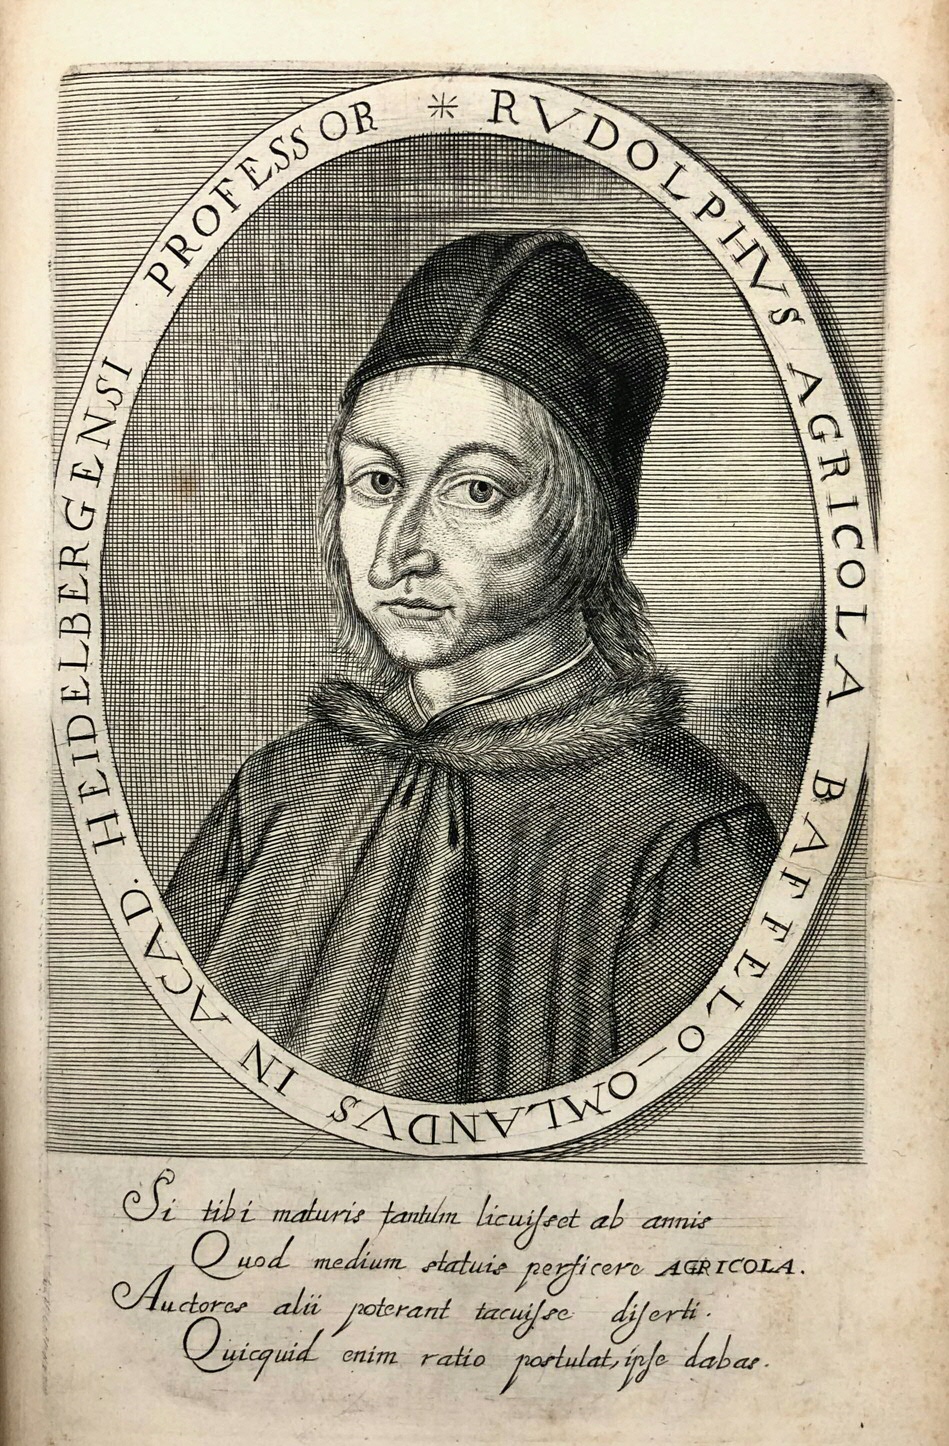 Rudolph Agricola depicted in Effigies & vitae professorum Academiae Groningae & Omlandiae = Portraits and lives of professors in the Academy of Groningen and its surrounding regions (Groningen 1654), p.28a. UBG uklu KW C 720. The poem reads as follows: “If it had only been granted to you, Agricola, to complete at a ripe old age that which you decided to do halfway through your life, other gifted authors could have been silent, as you gave all that reason demands.”